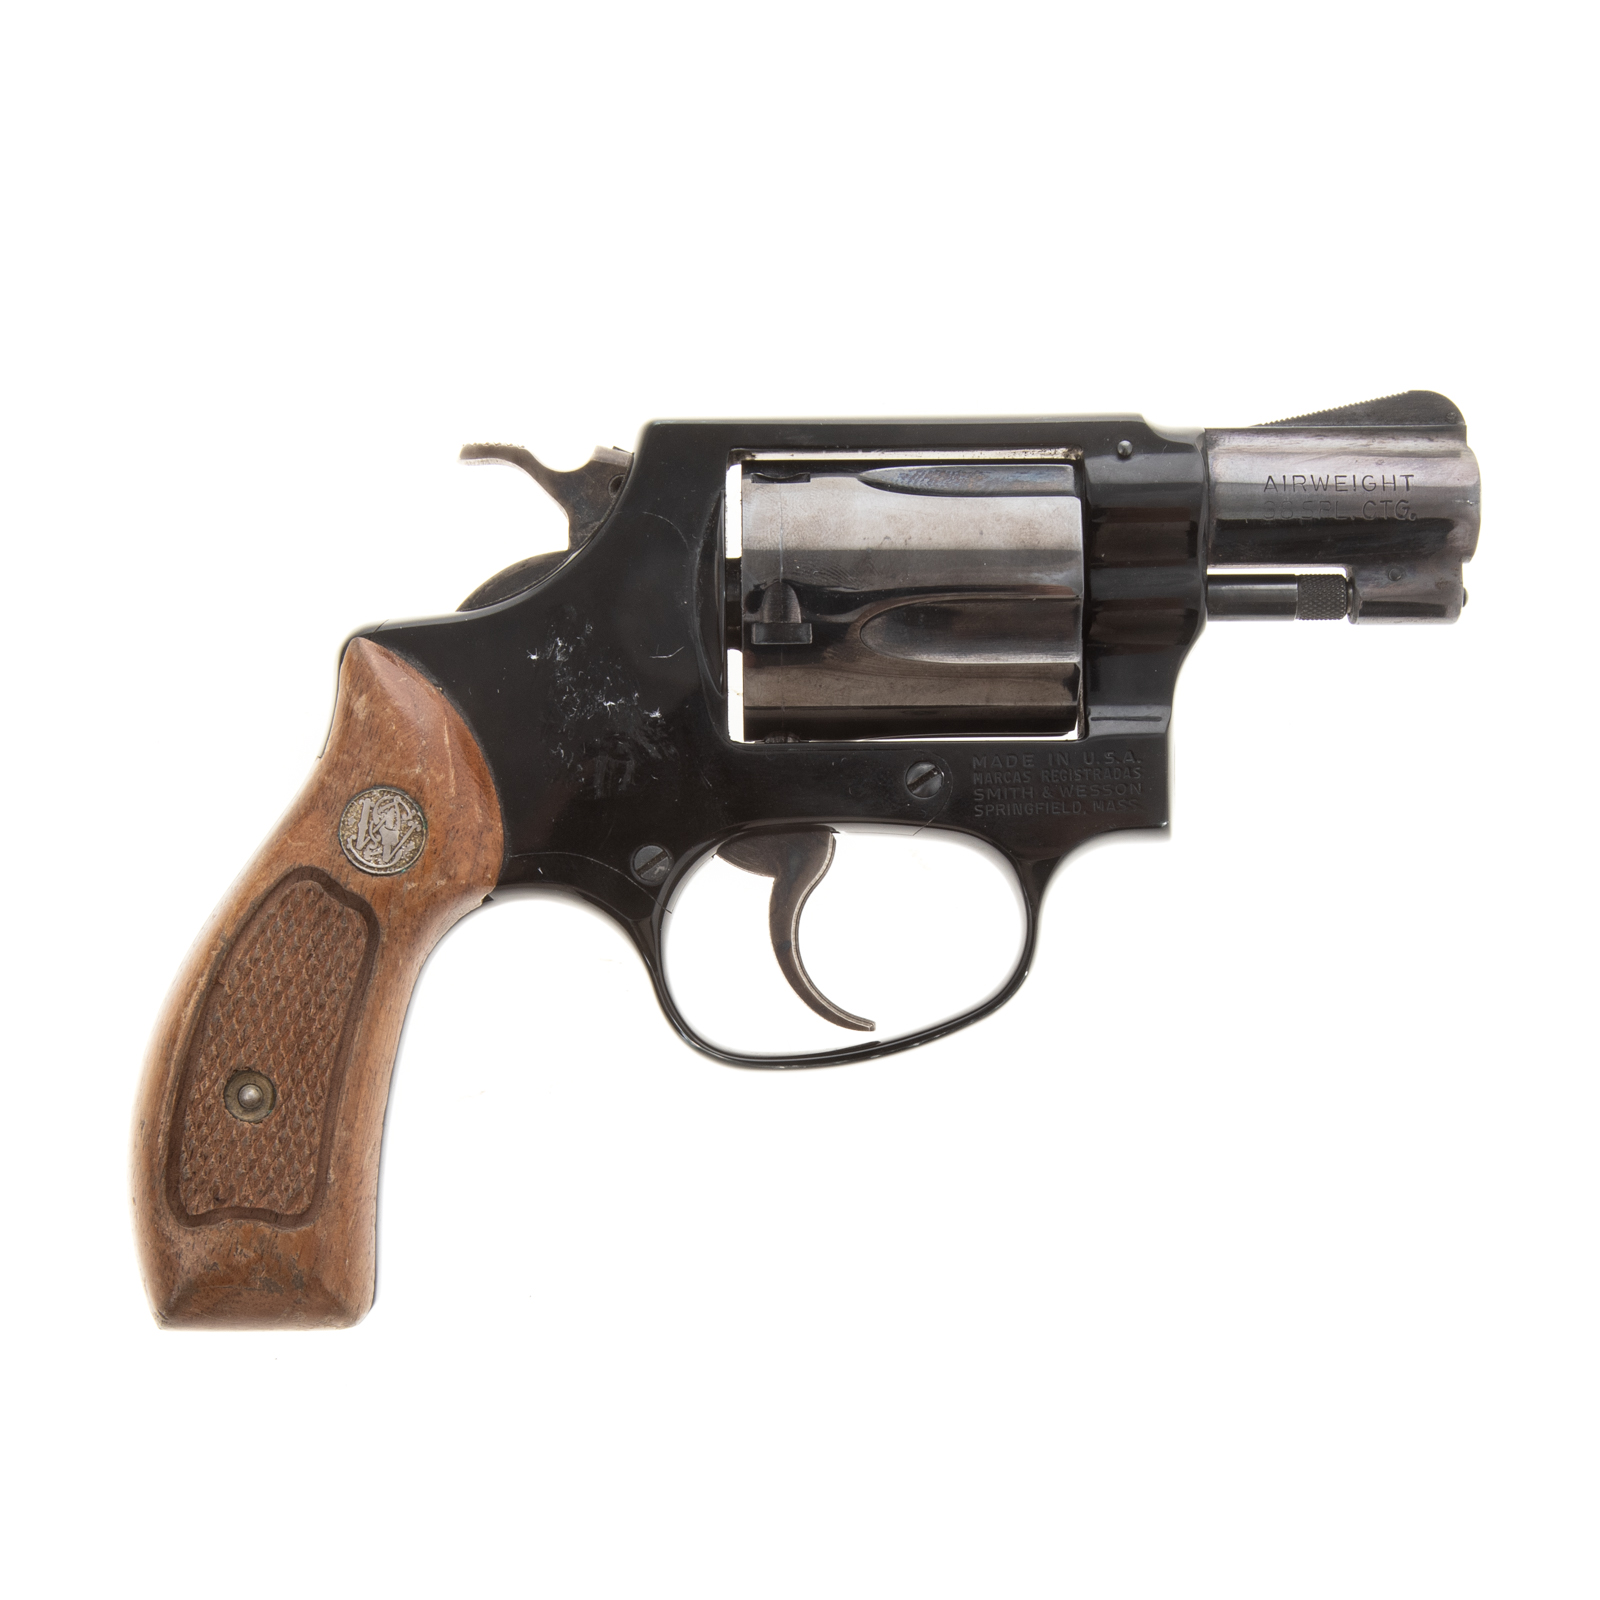 SMITH AND WESSON AIRWEIGHT DOUBLE ACTION